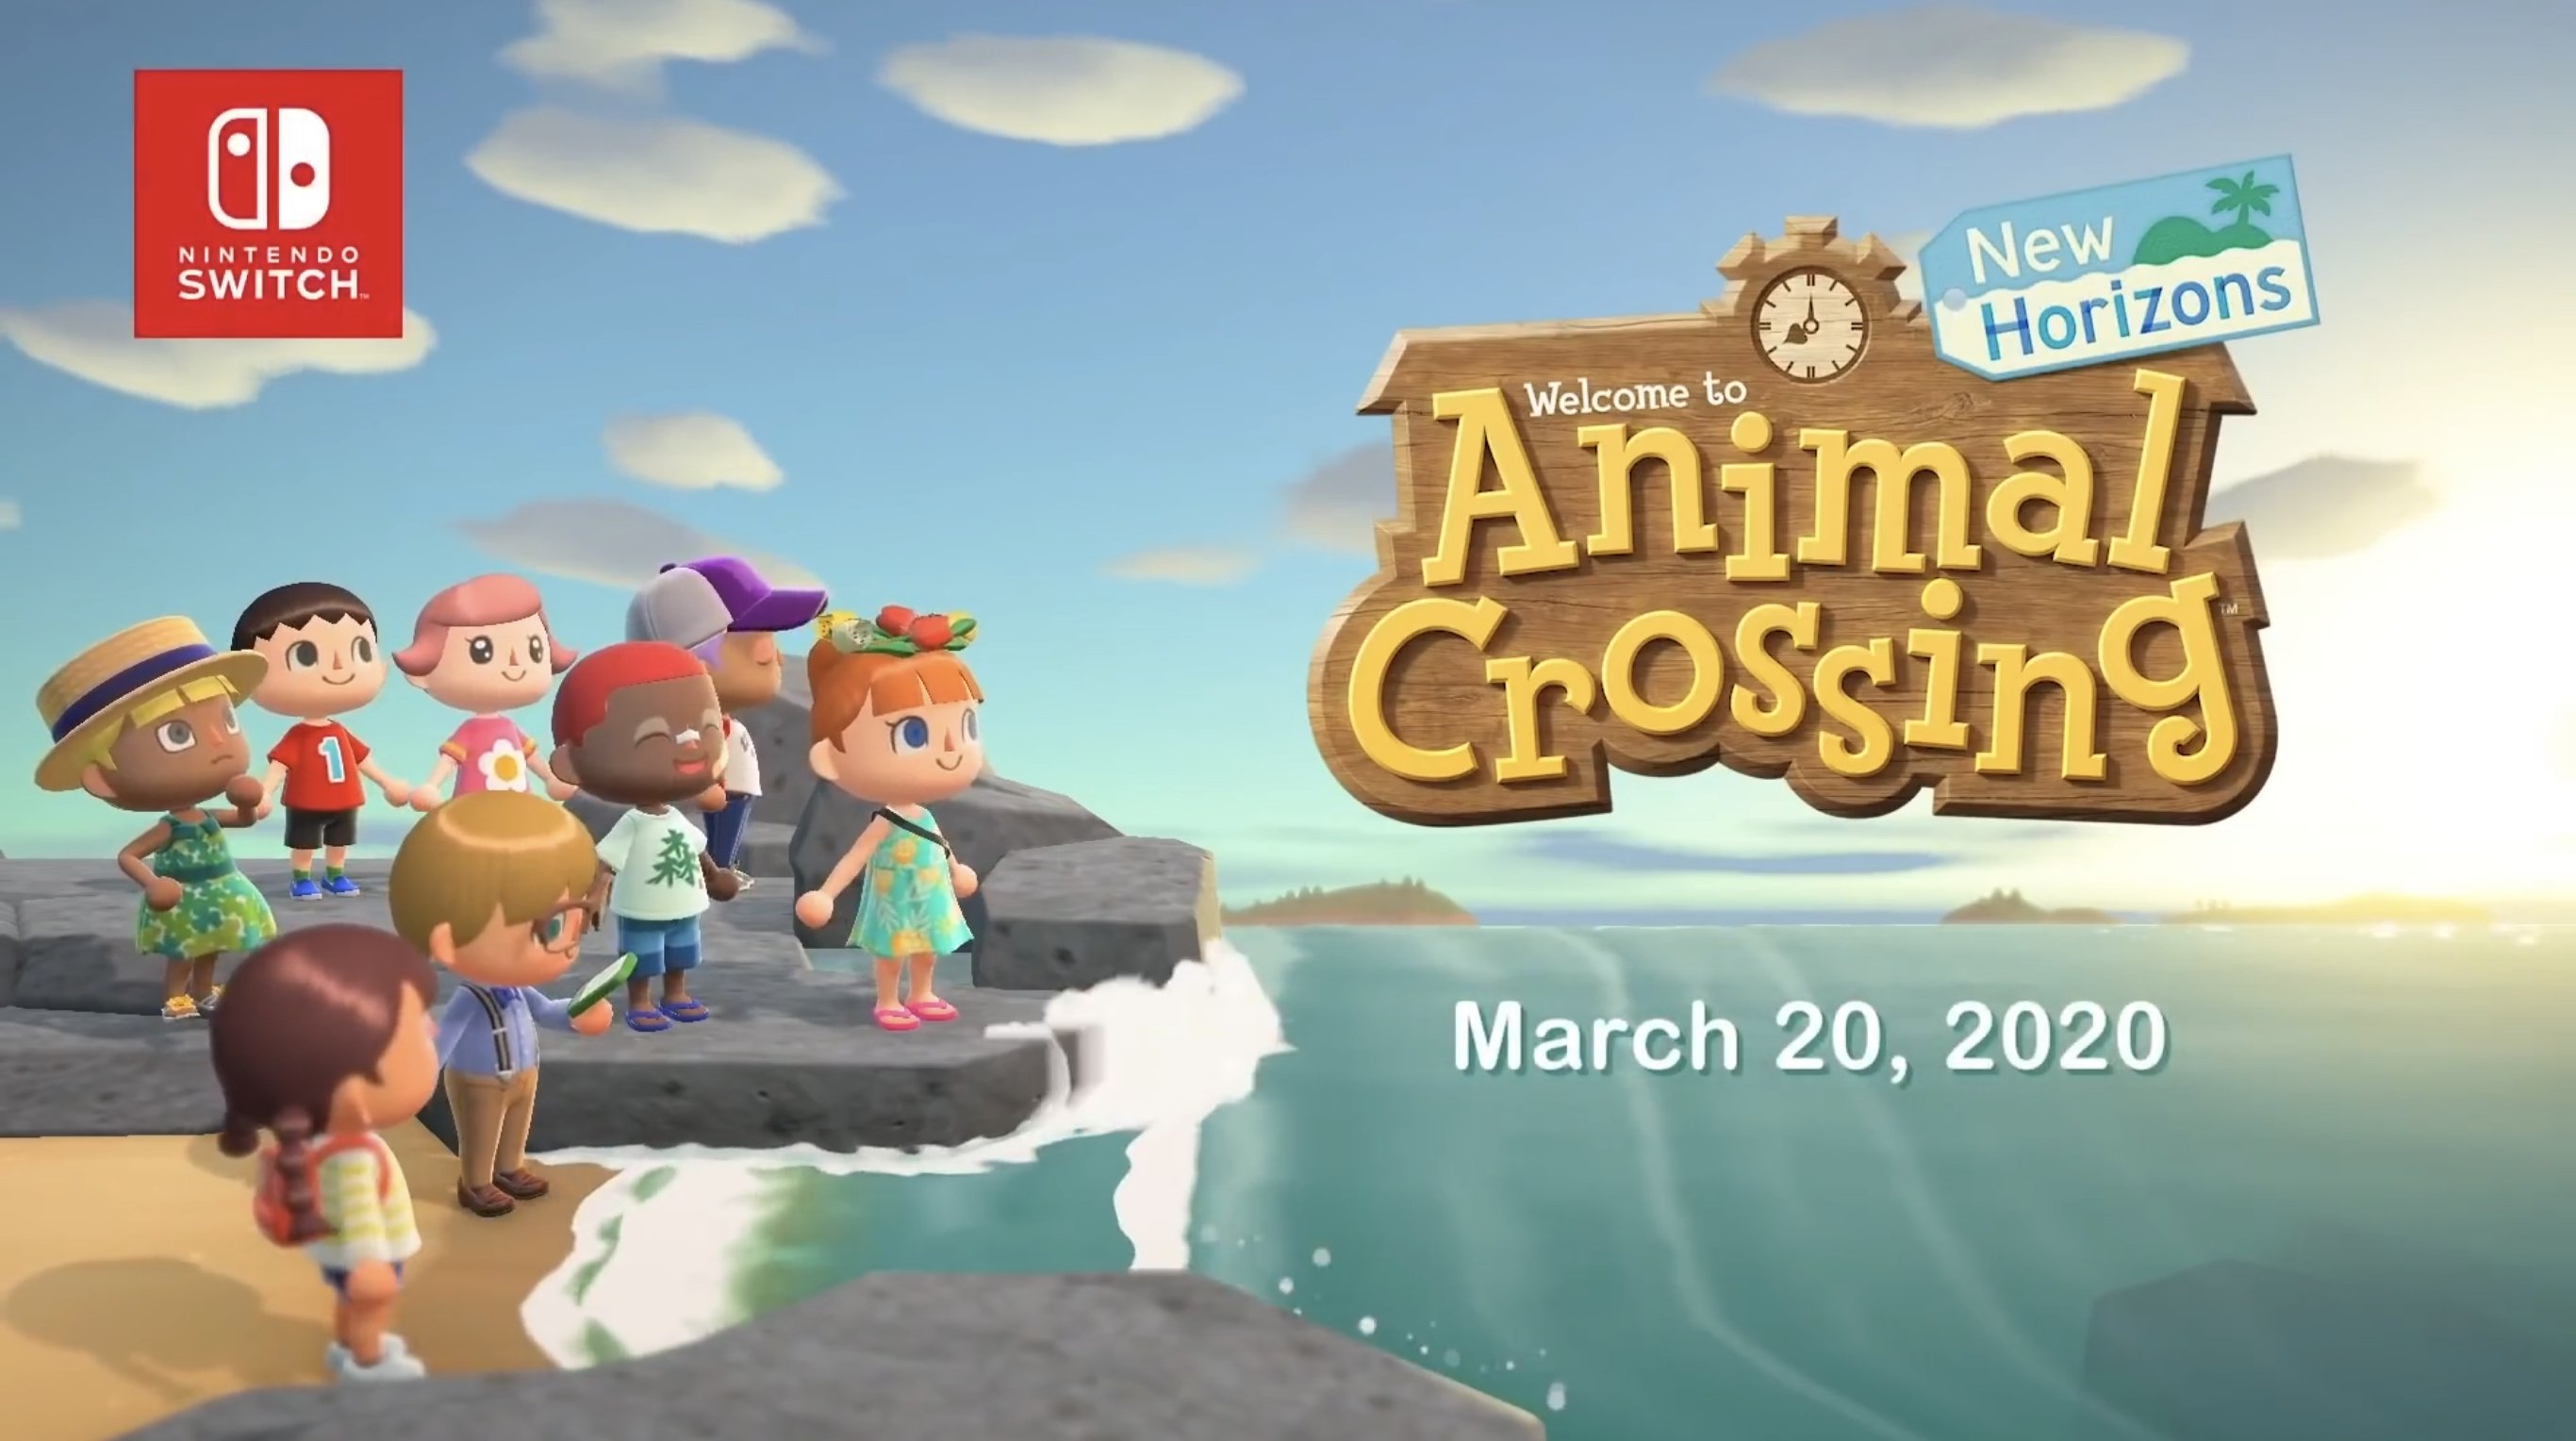 Everything New in Animal Crossing: New Horizons